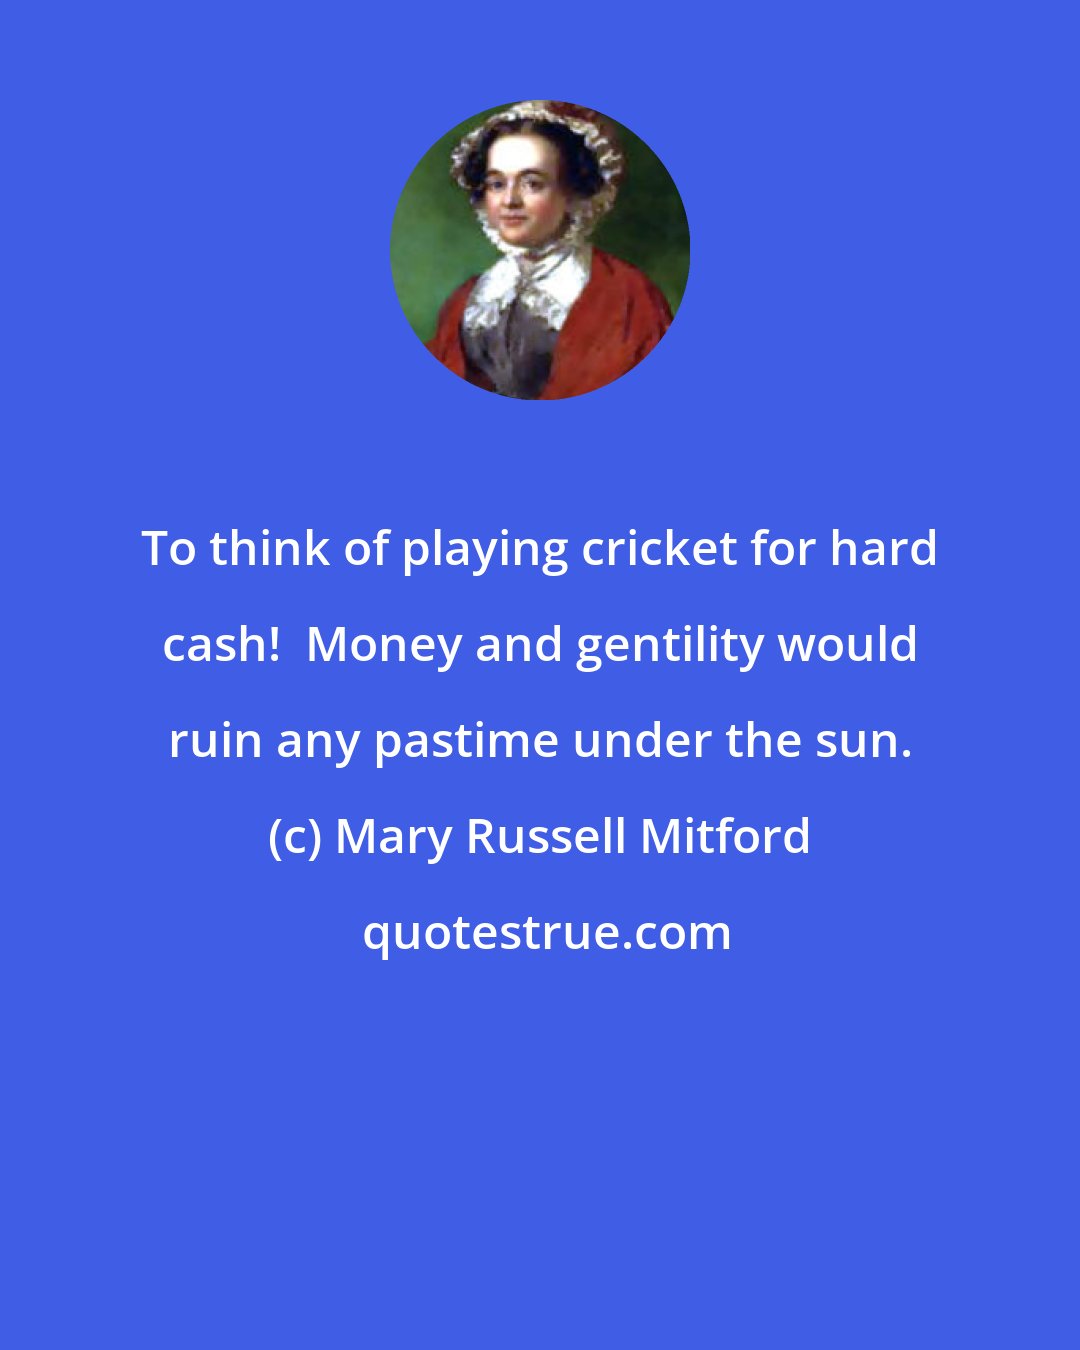 Mary Russell Mitford: To think of playing cricket for hard cash!  Money and gentility would ruin any pastime under the sun.